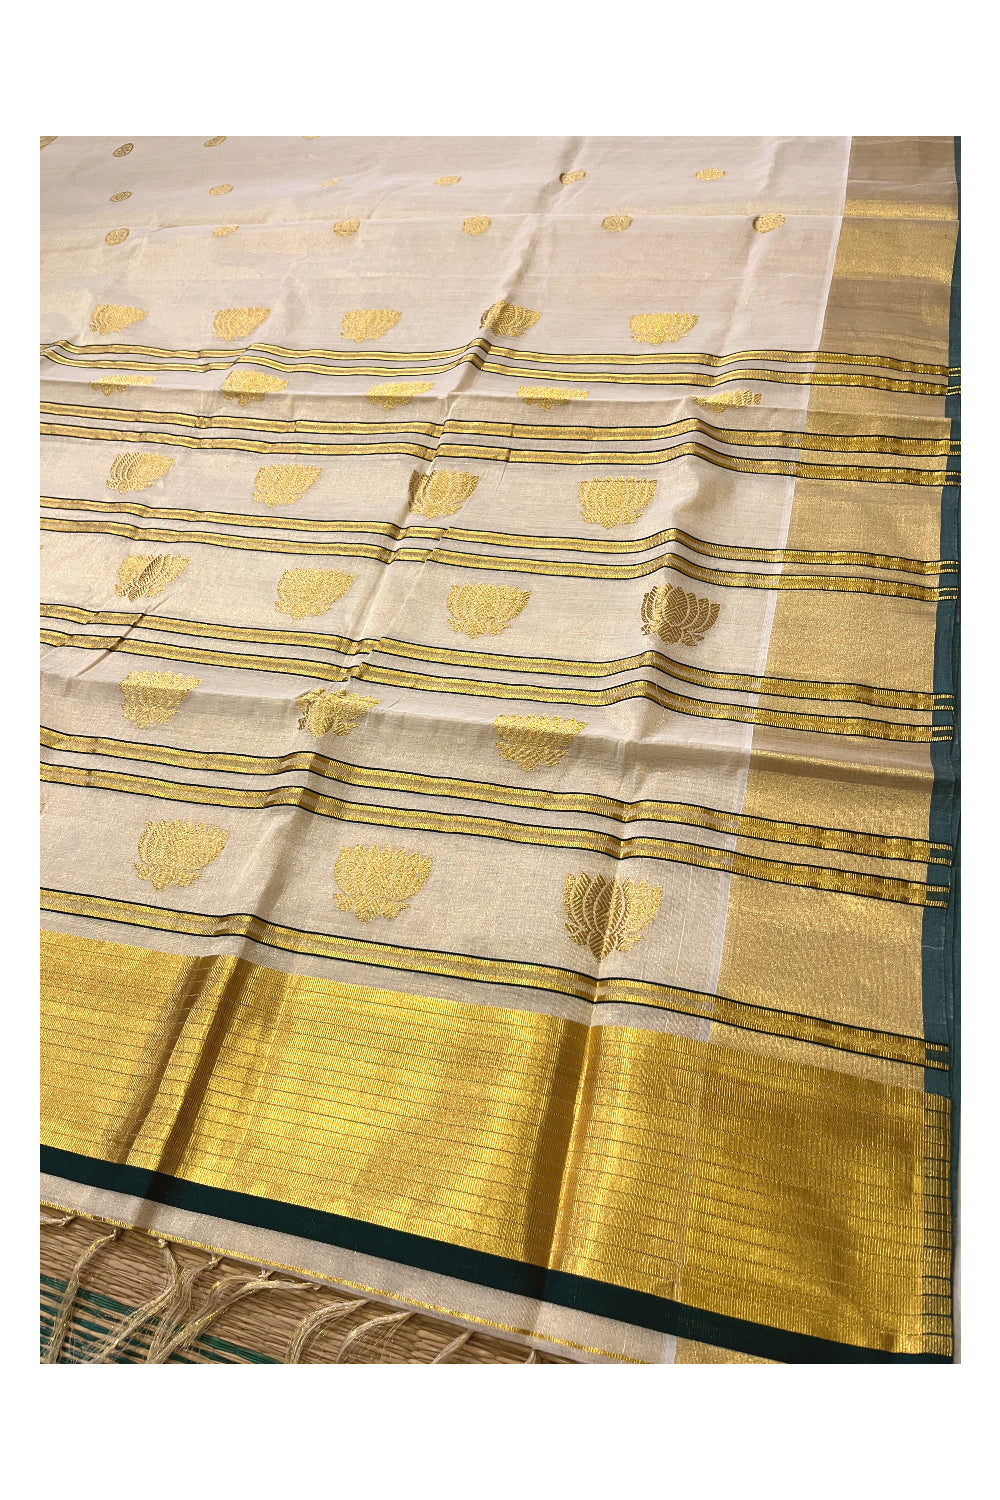 Southloom Premium Handloom Tissue Saree with Golden Lotus Woven Works on Body